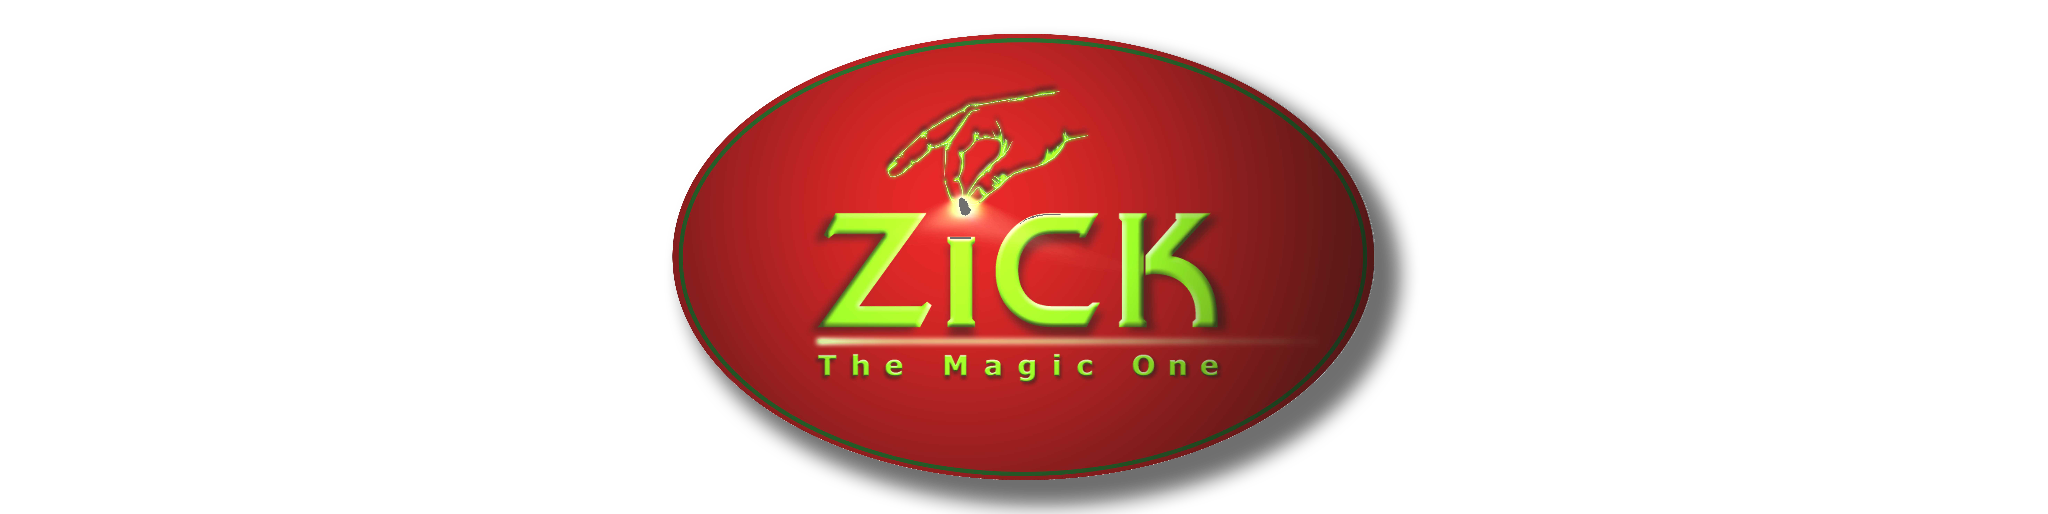 ZiCK - The Magic One